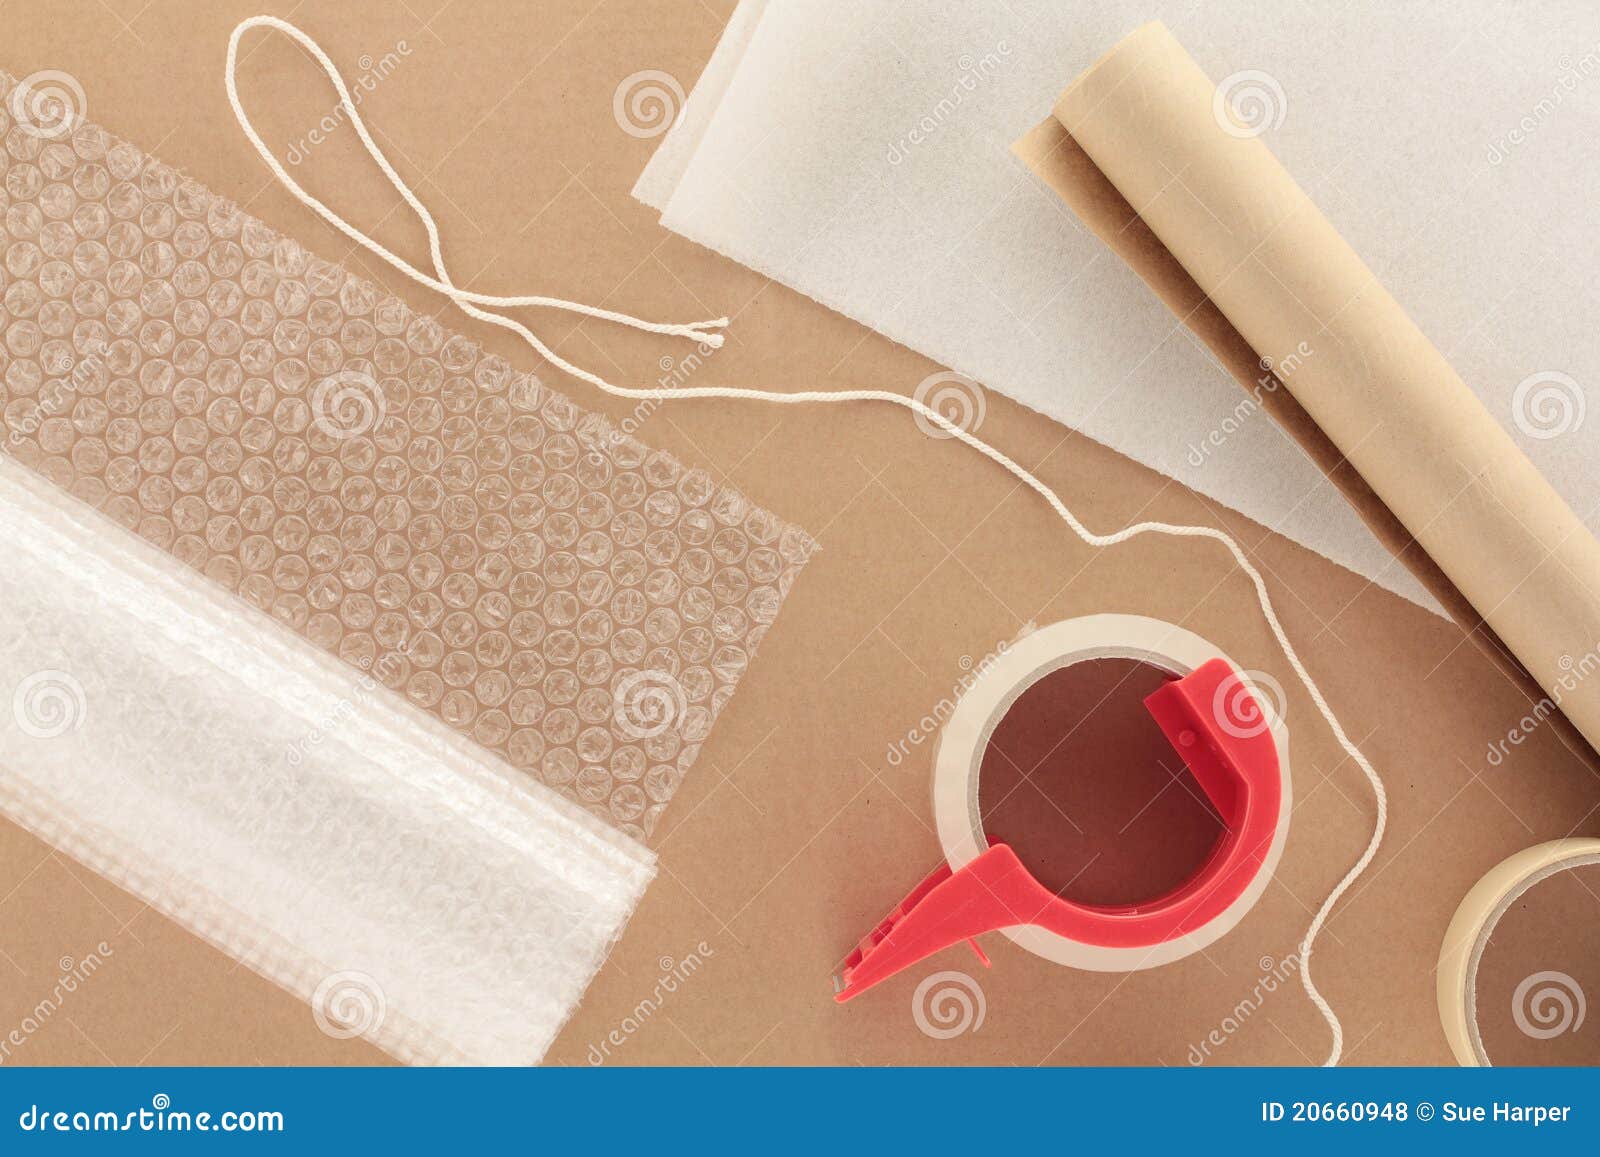 packaging materials with string